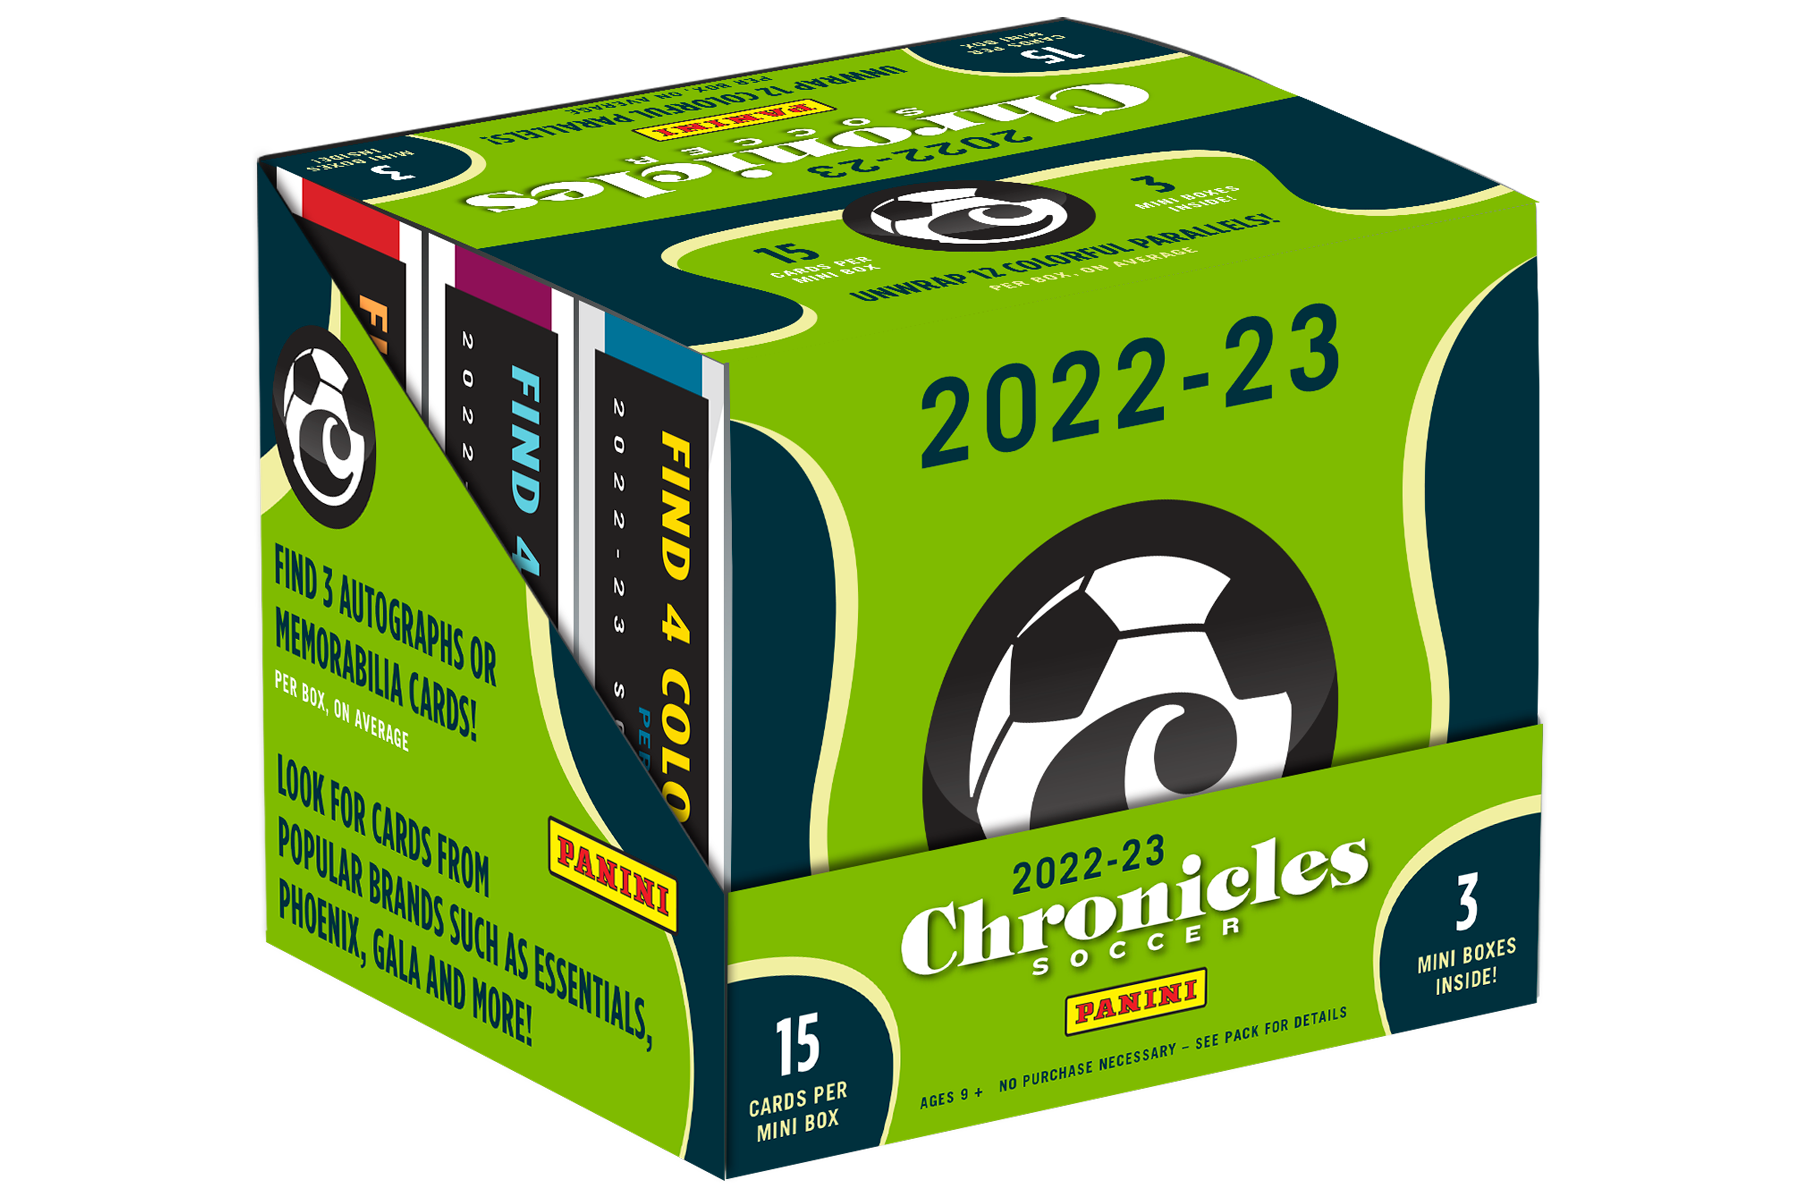  2023 Panini Adrenalyn XL Women's FIFA World Cup Cards - 24-Pack  Box (144 Cards) : Toys & Games